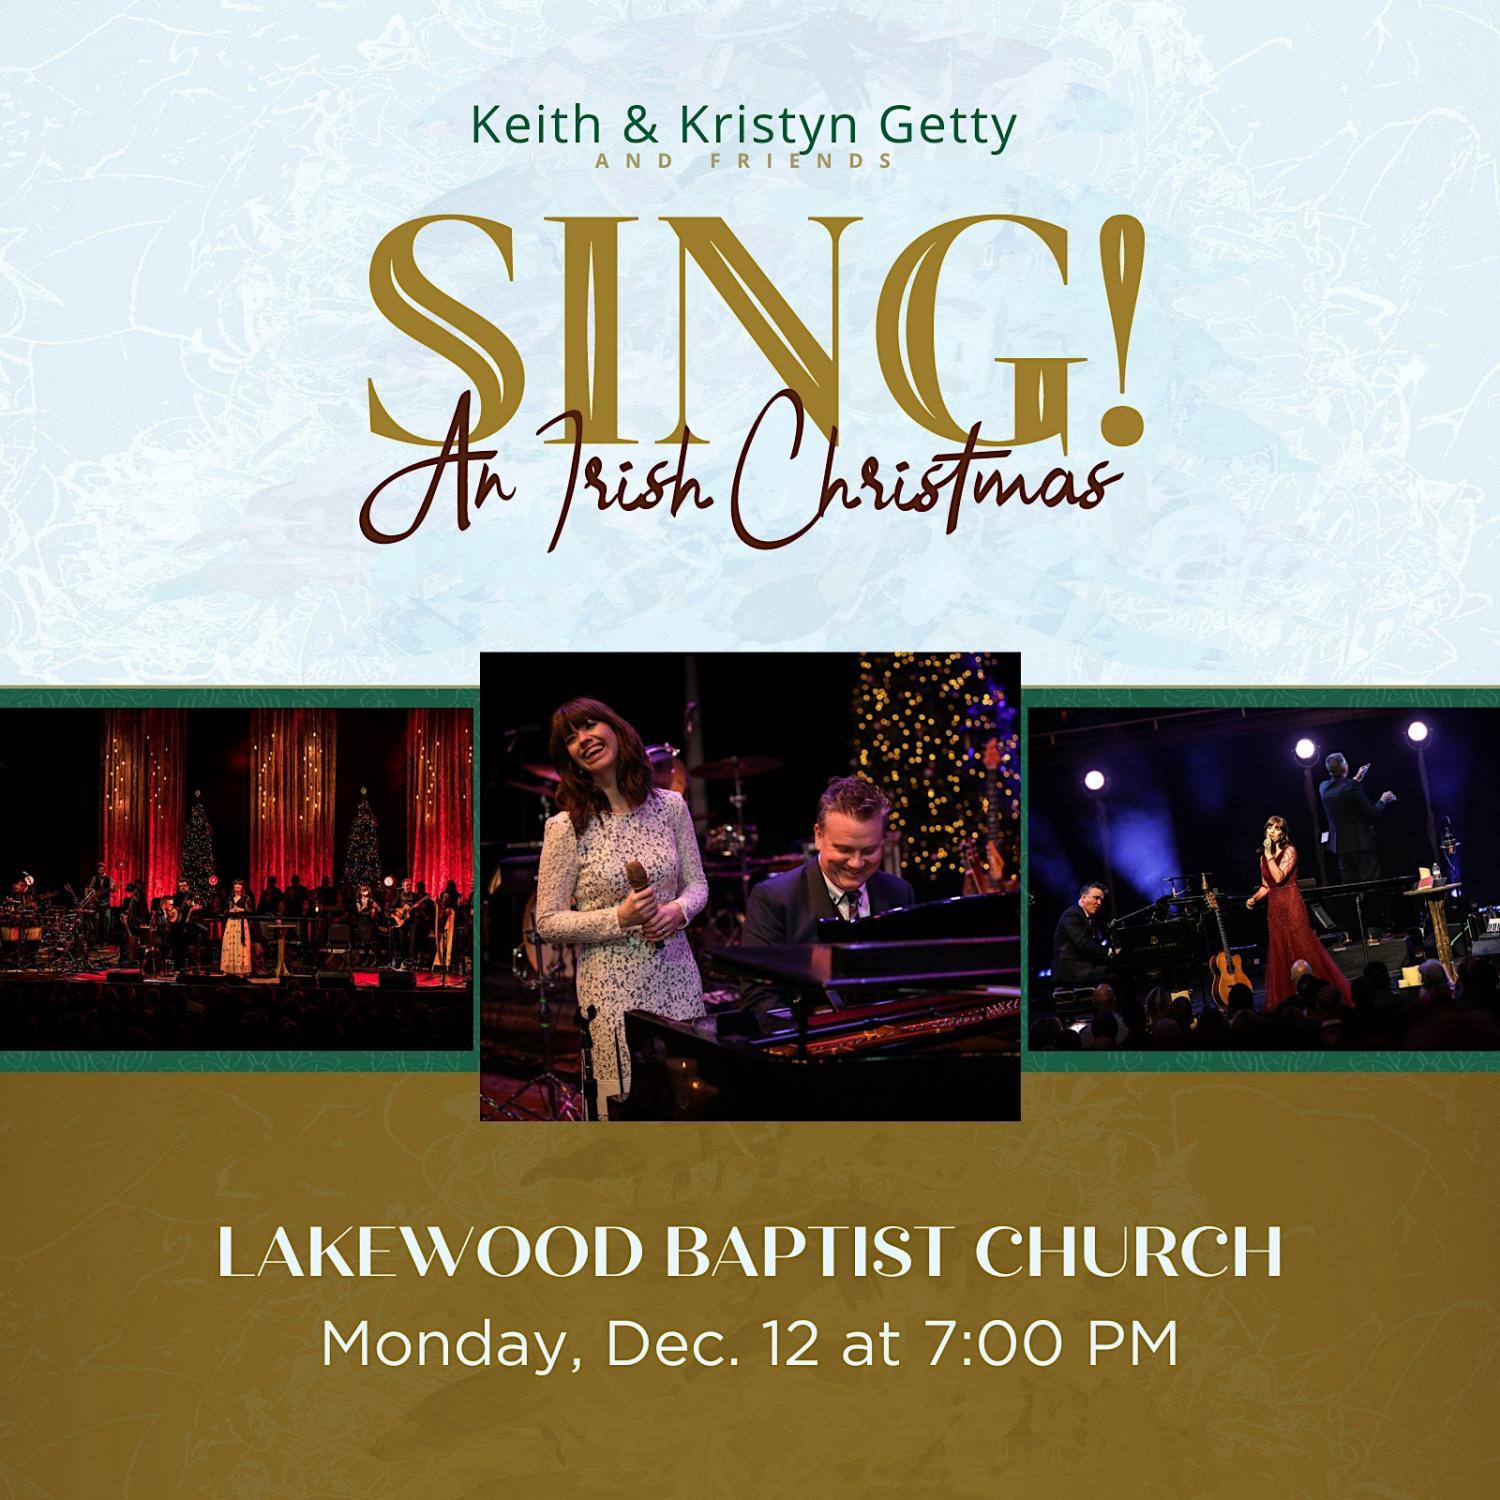 Sing! An Irish Christmas with the Gettys
Mon Dec 12, 7:00 PM - Mon Dec 12, 9:30 PM
in 55 days